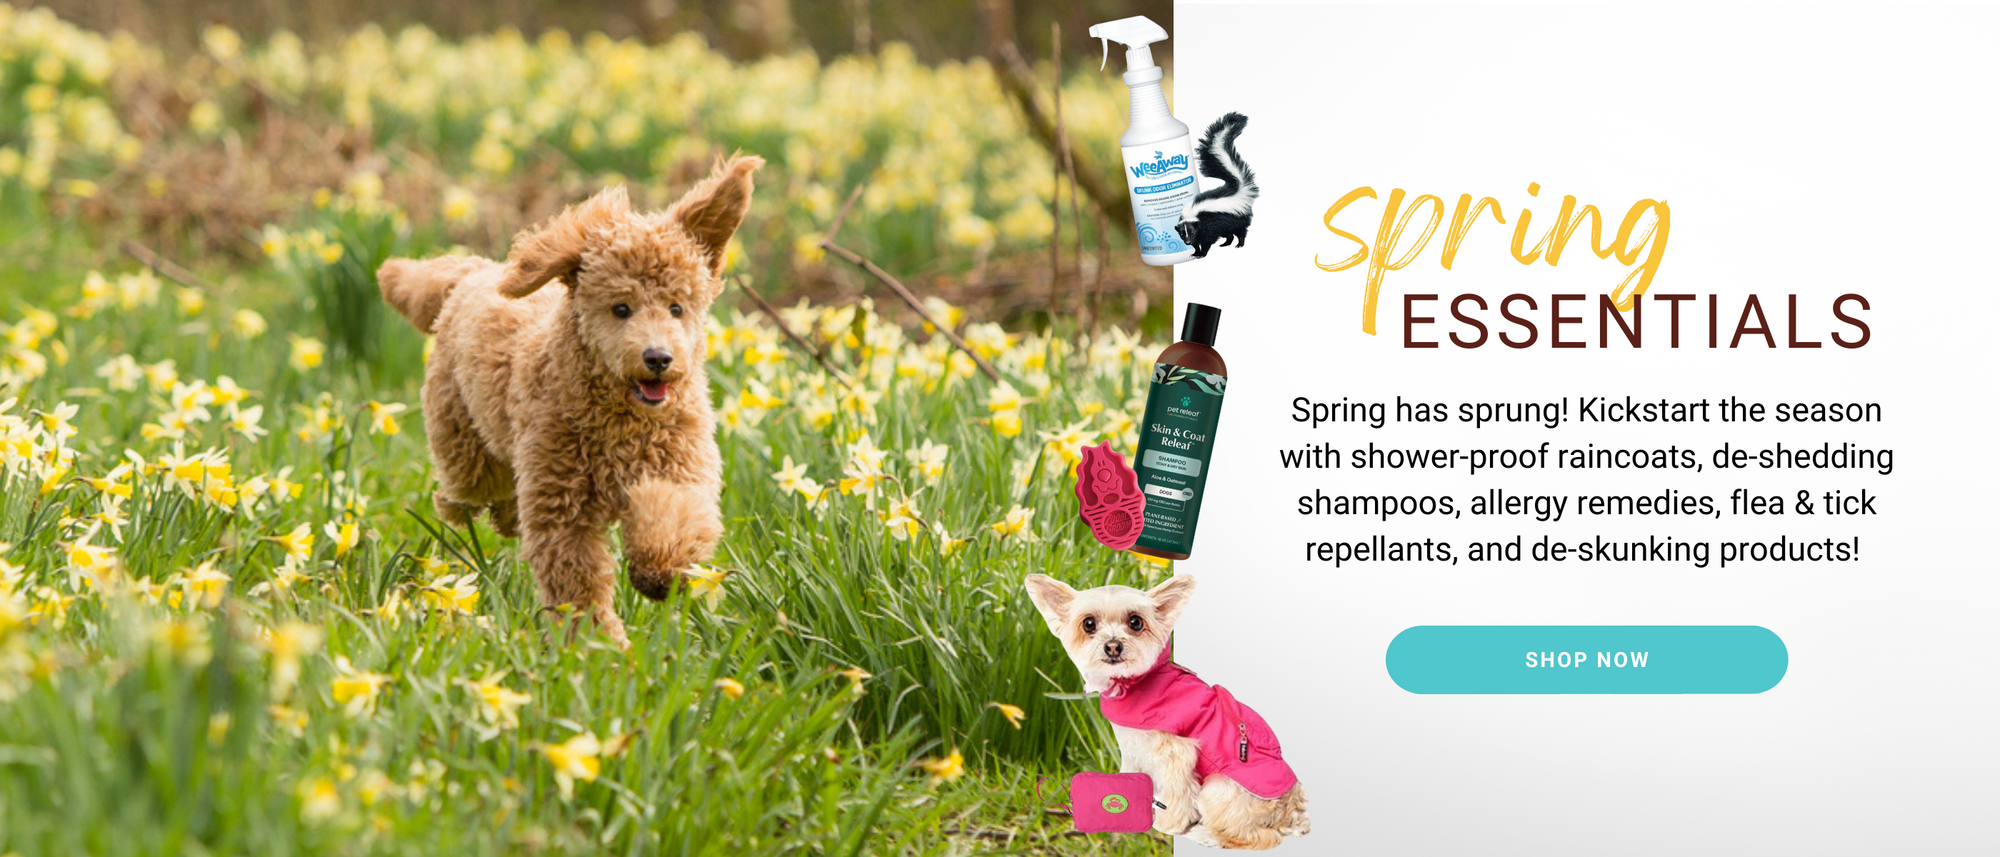 Spring Essentials! Spring has Sprung! Kickstart the season with shower-proof raincoats, de-shedding shampoos, allergy remedies, flea & tick repellants, and de-skunking products!! Shop Now!